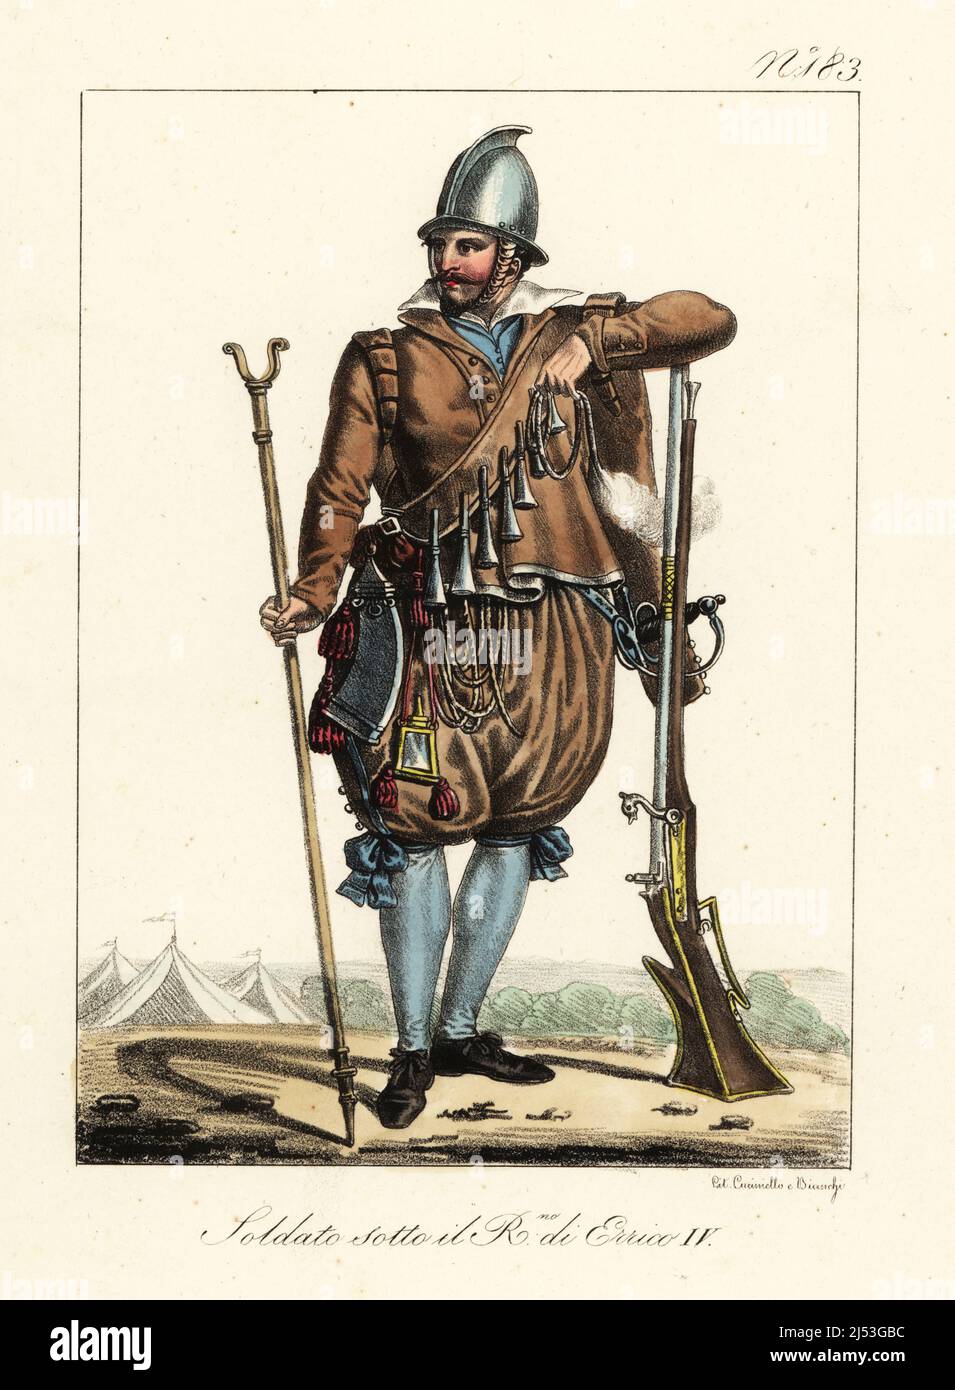 French soldier during the reign of King Henry IV of France, circa 1600. In morion helmet, doublet, pumpkin breeches, hose and shoes, armed with arquebus, powder horn, match and fork-rest. Soldat sous le Regne de Henry IV. Handcoloured lithograph by Lorenzo Bianchi and Domenico Cuciniello after Hippolyte Lecomte from Costumi civili e militari della monarchia francese dal 1200 al 1820, Naples, 1825. Italian edition of Lecomte’s Civilian and military costumes of the French monarchy from 1200 to 1820. Stock Photo